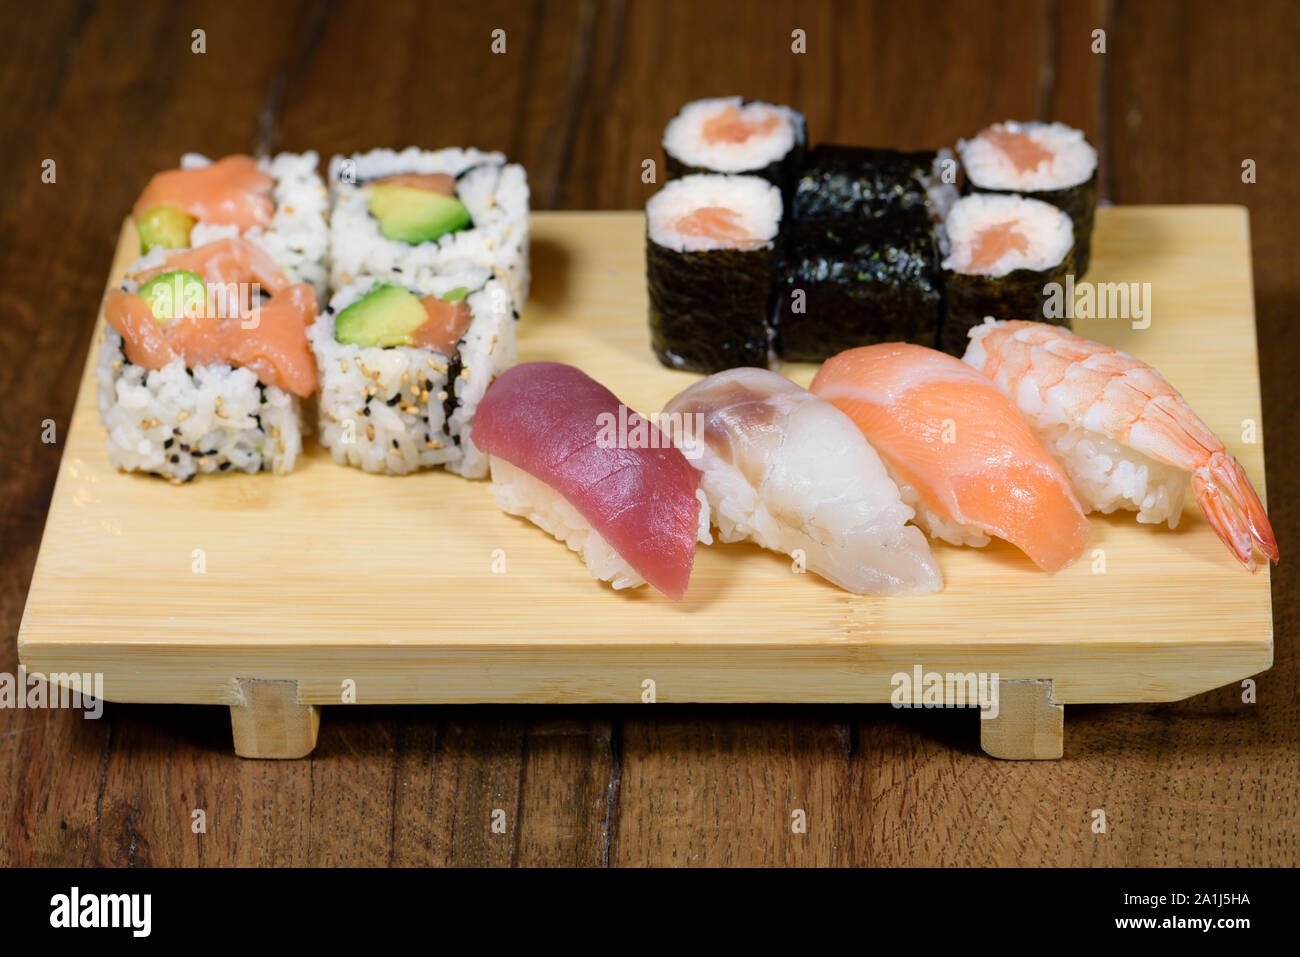 mix of sushi, sushi roll and nigiri with salmon, tuna, sea bass, shrimp, avocado served on a wooden plate, dark wood table background Stock Photo